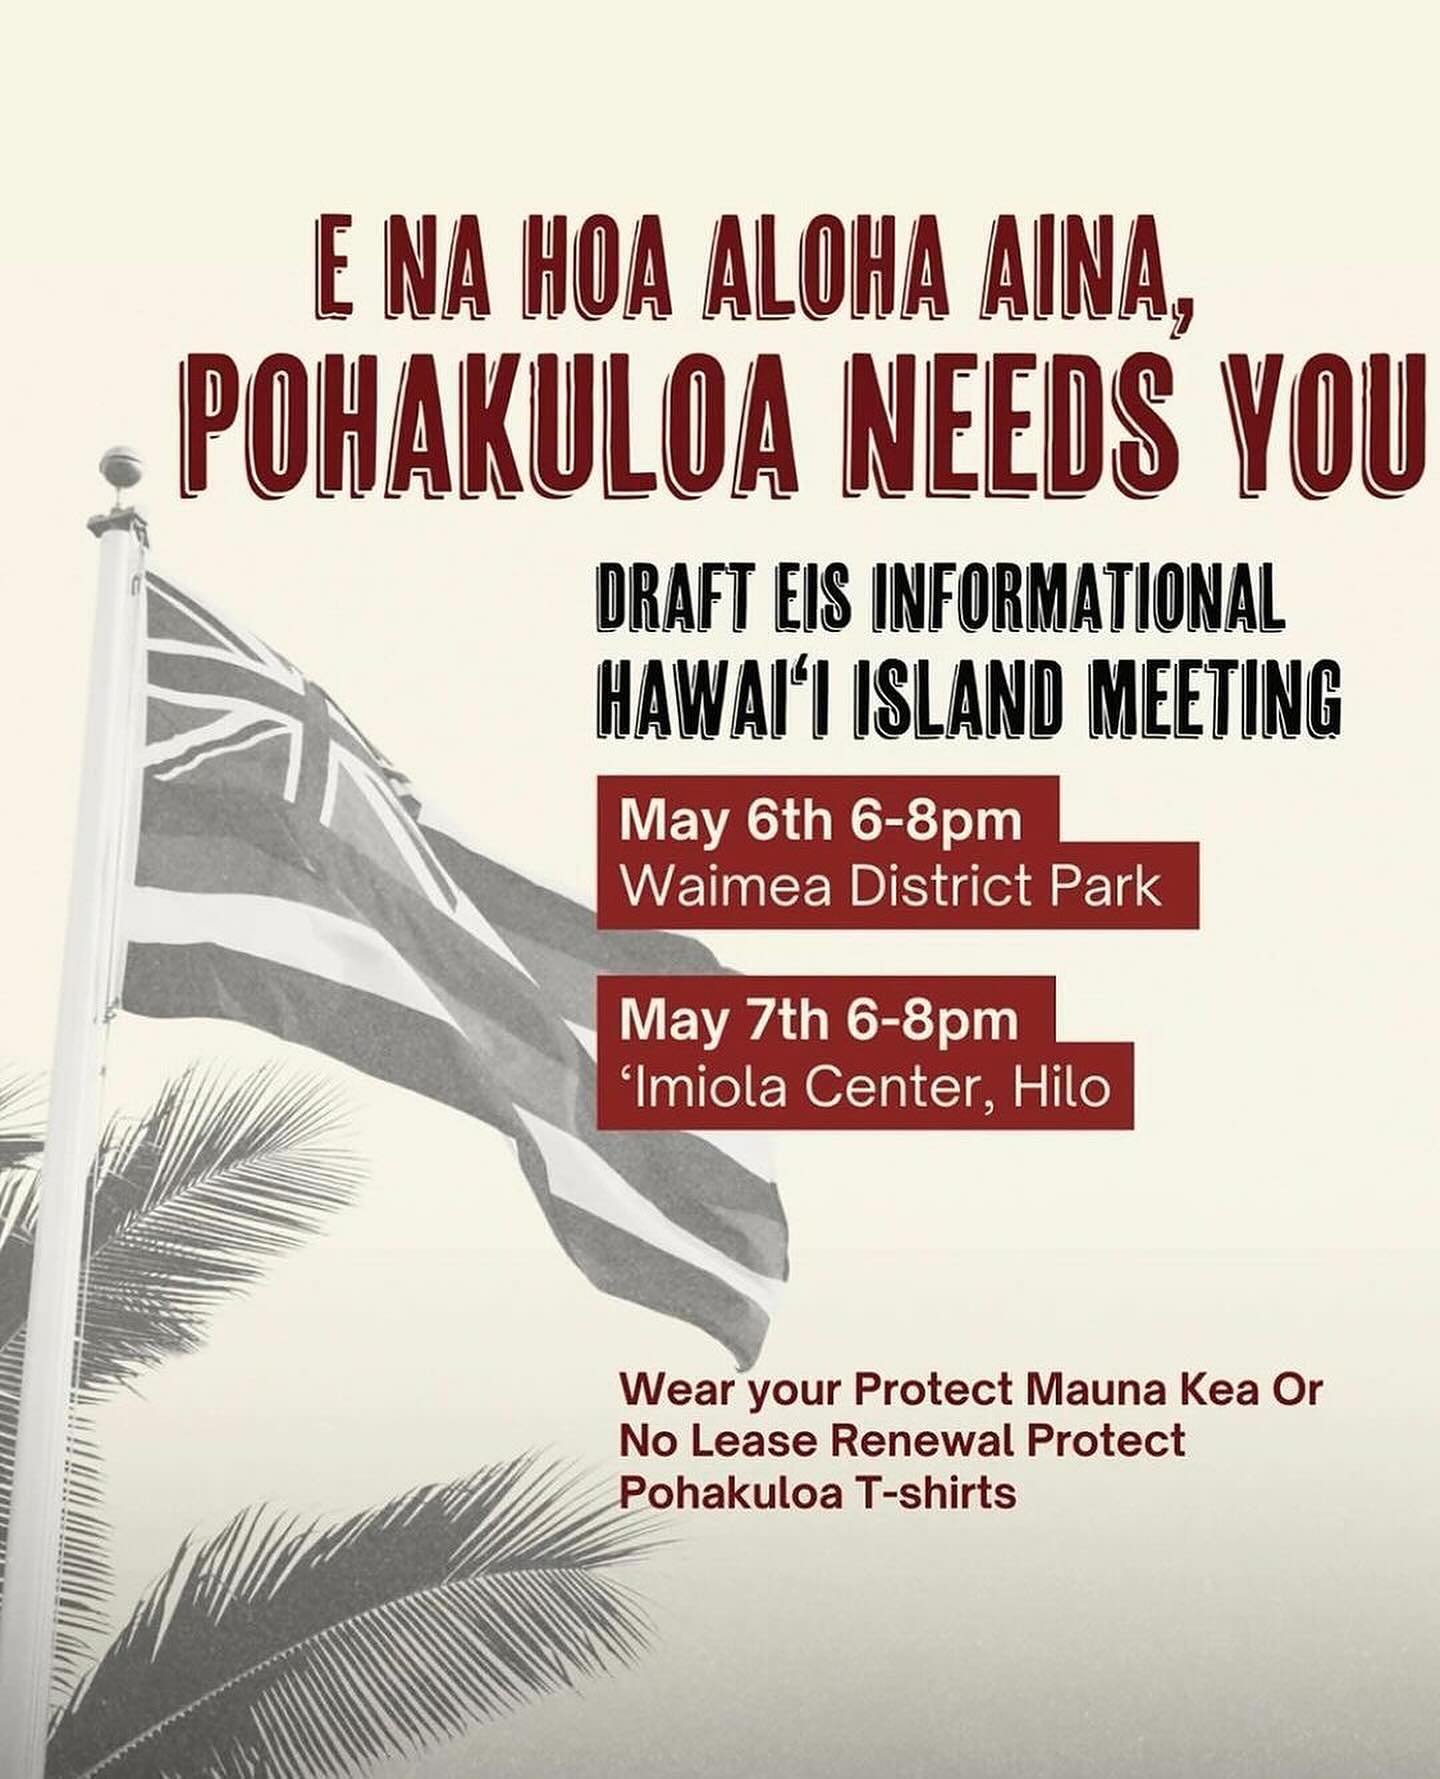 Mahalo to @huialohaainaohilo for the post and graphics that I am resharing. Please consider going to one of these meetings. Repost from @puacase
&bull;
Kohala, Waimea, Hāmākua, please show up at the meeting if you can. Pōhakuloa, at the base of the m